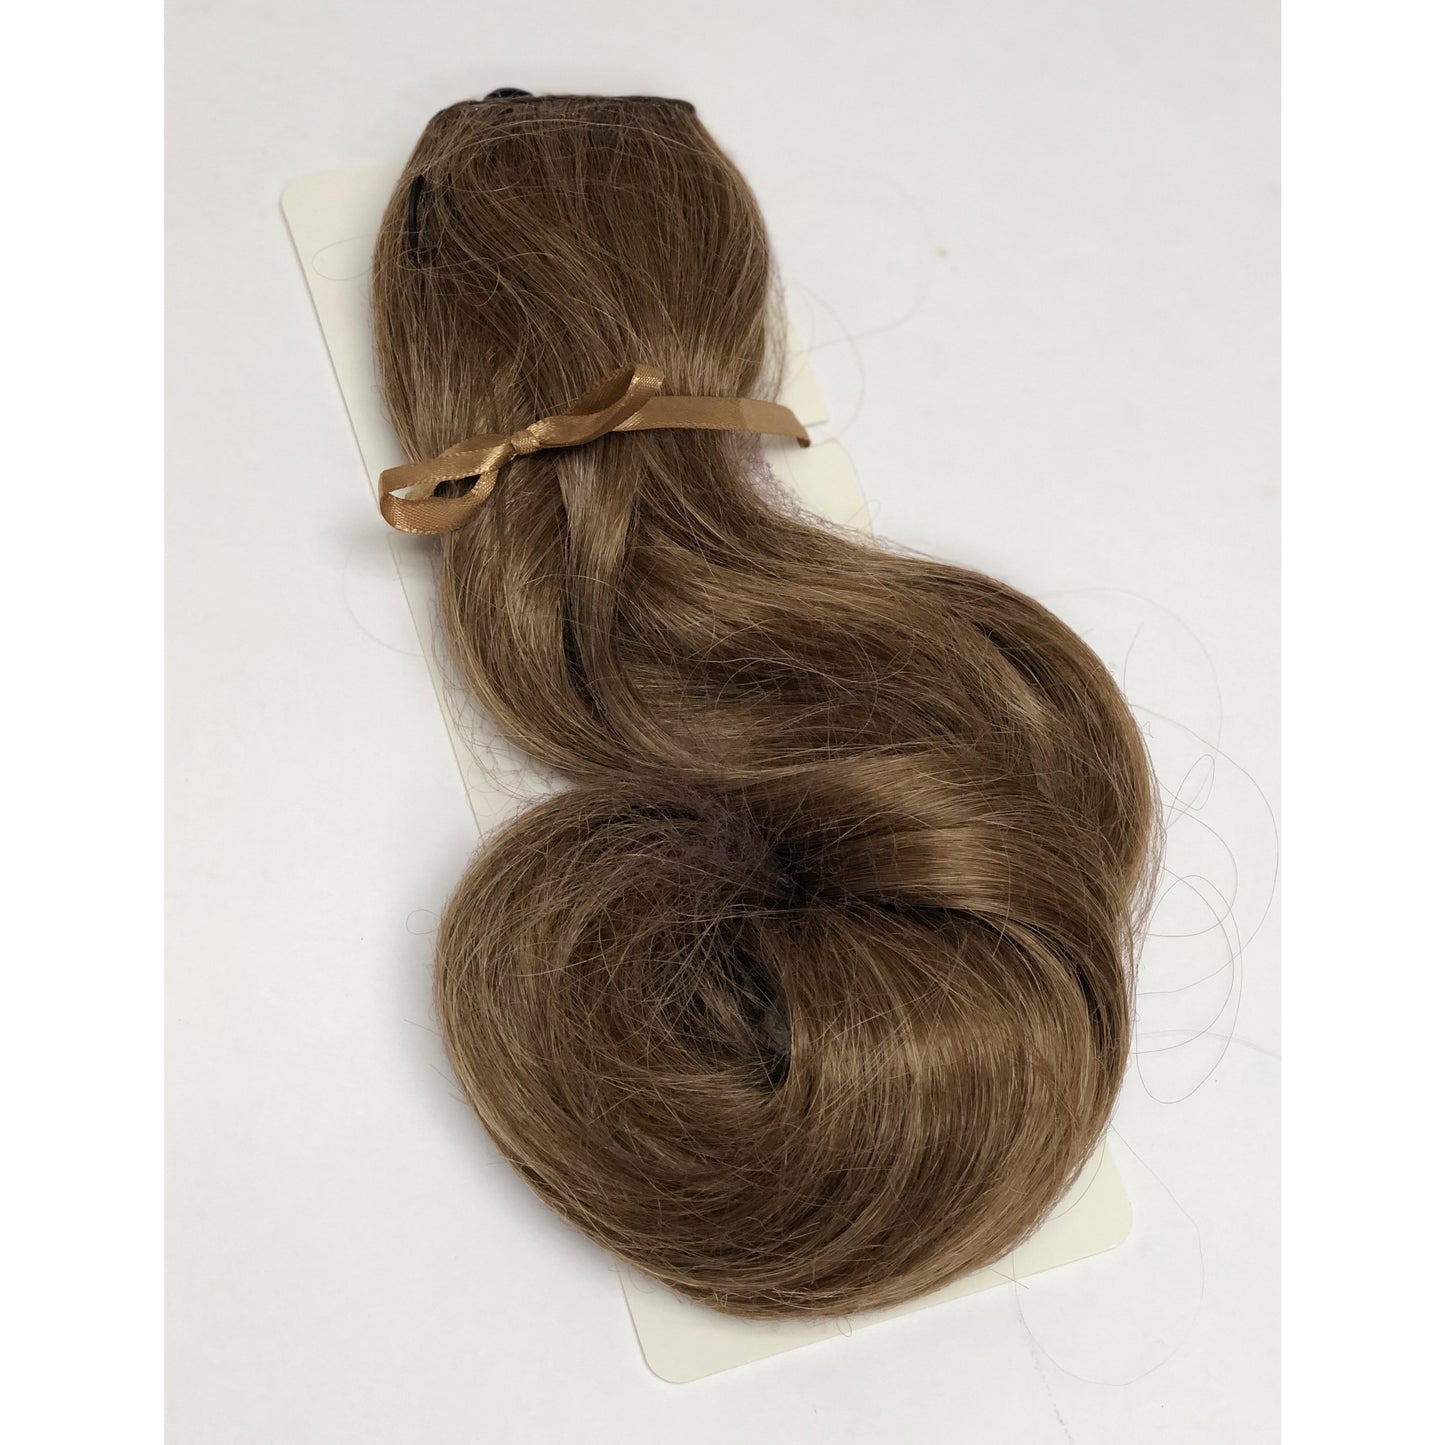 Christie Brinkley 16"  Synthetic Hair Extension (1 Piece) - BeautyGiant USA